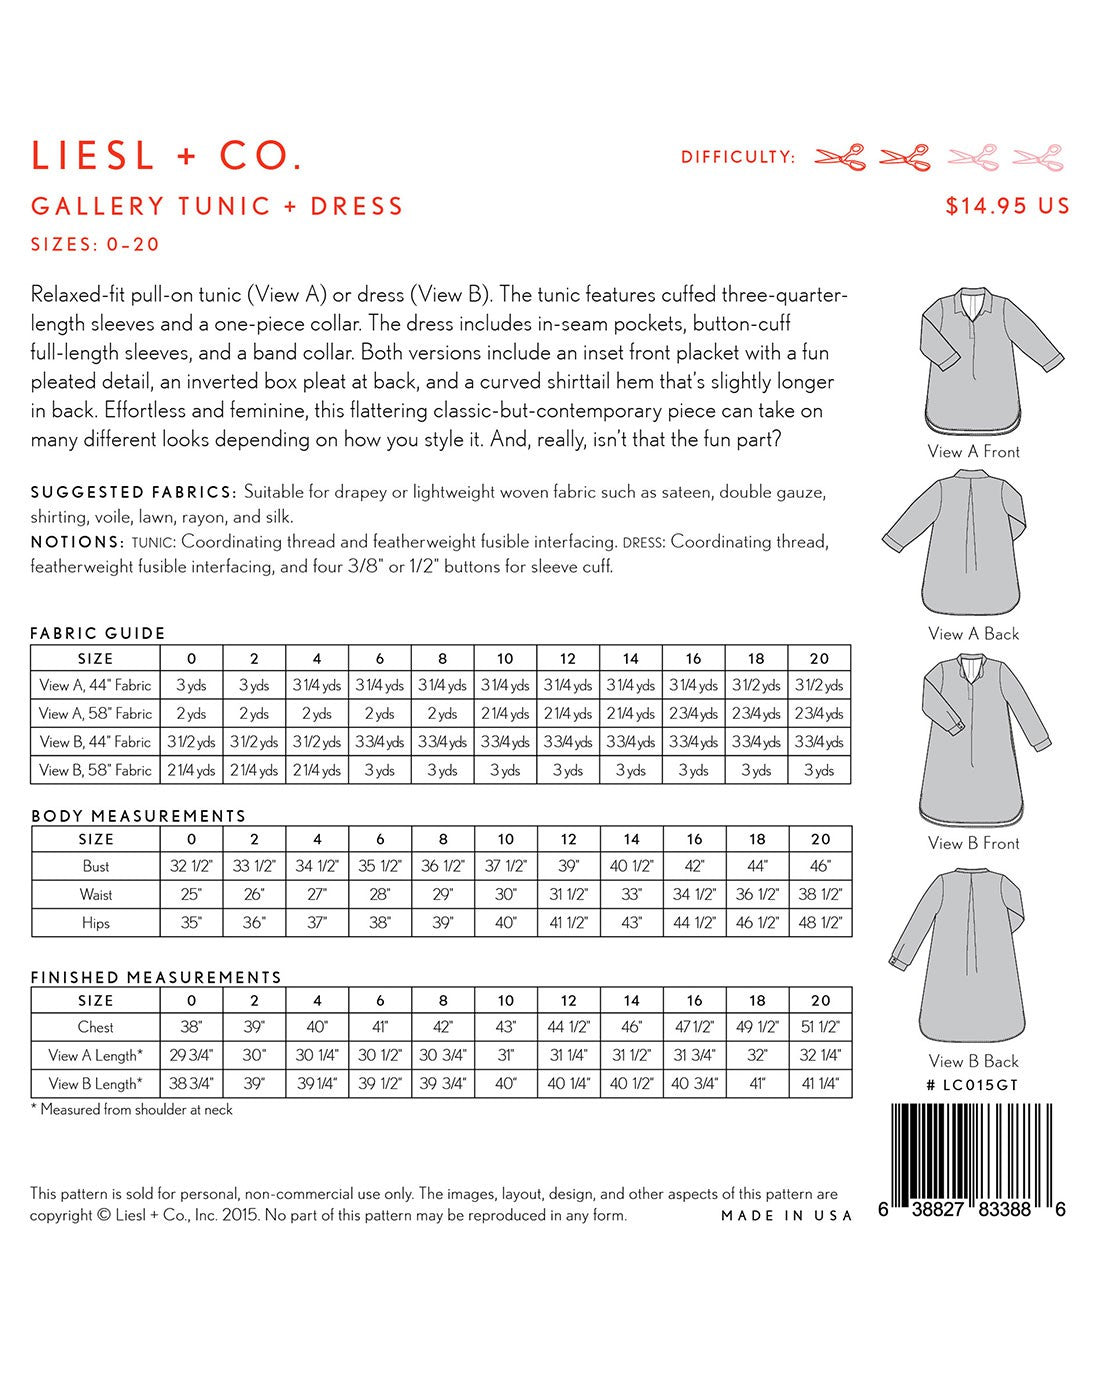 Gallery Tunic and Dress Sizes 0 - 20 Sewing Pattern by Liesl Gibson of Liesl and Co.